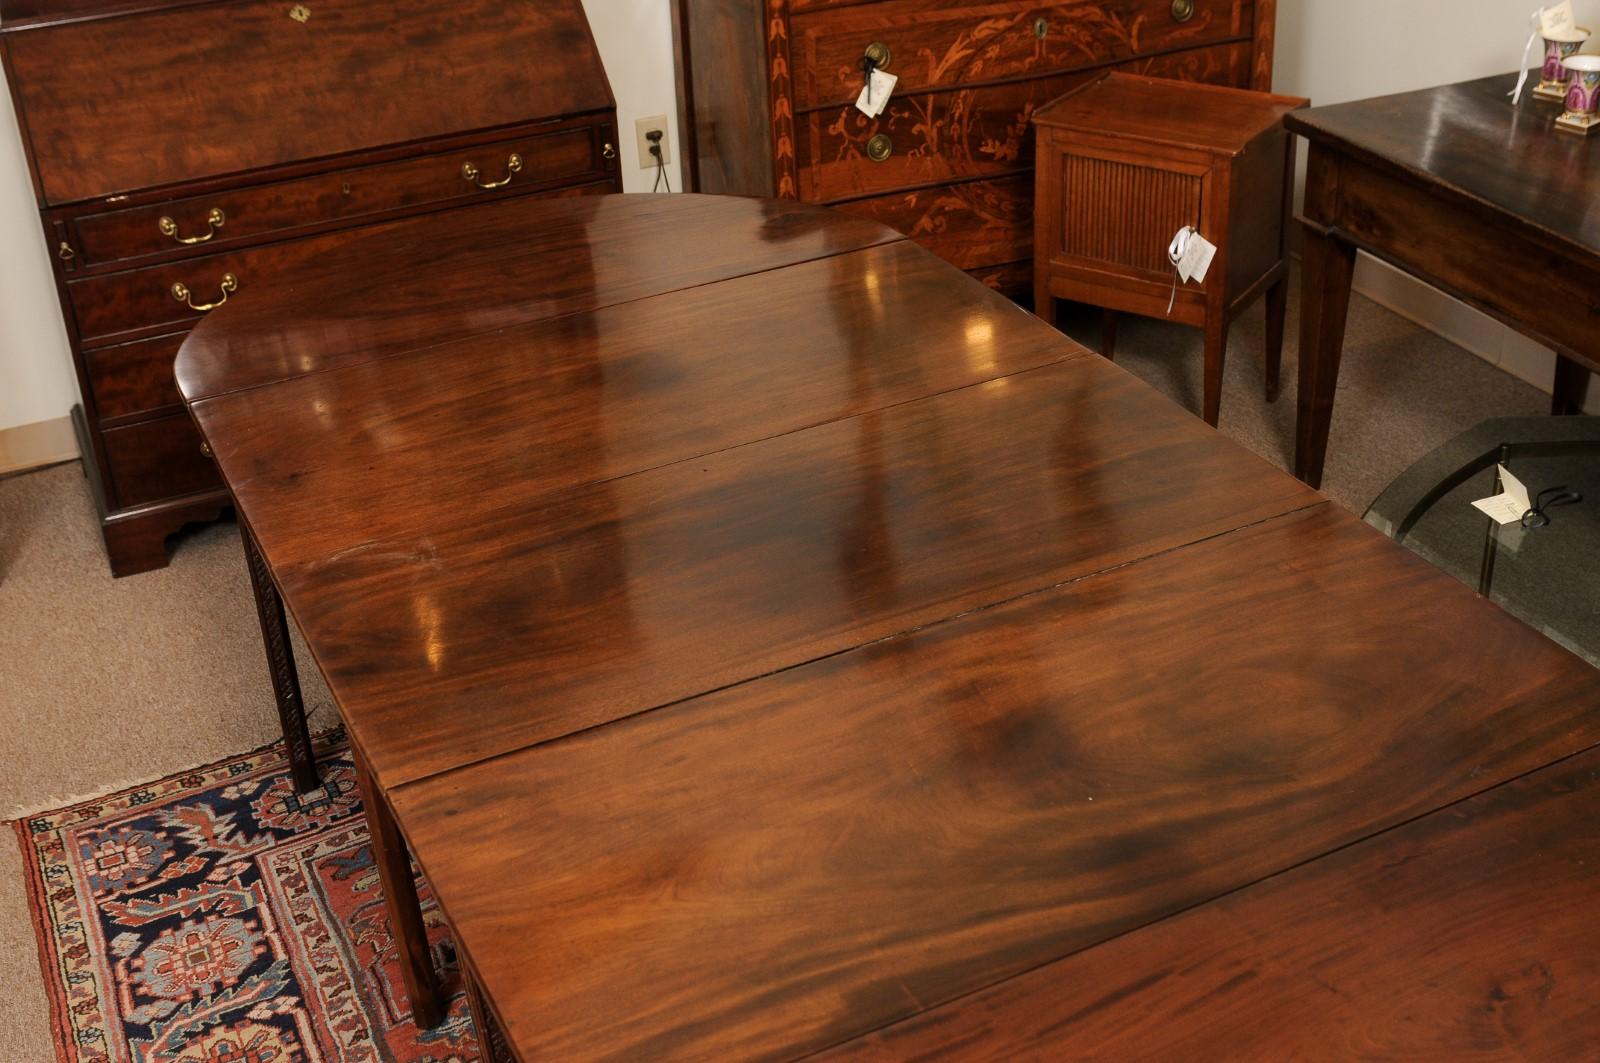 19th Century English Mahogany Dining Table with Carved Legs & 2 Leaves.